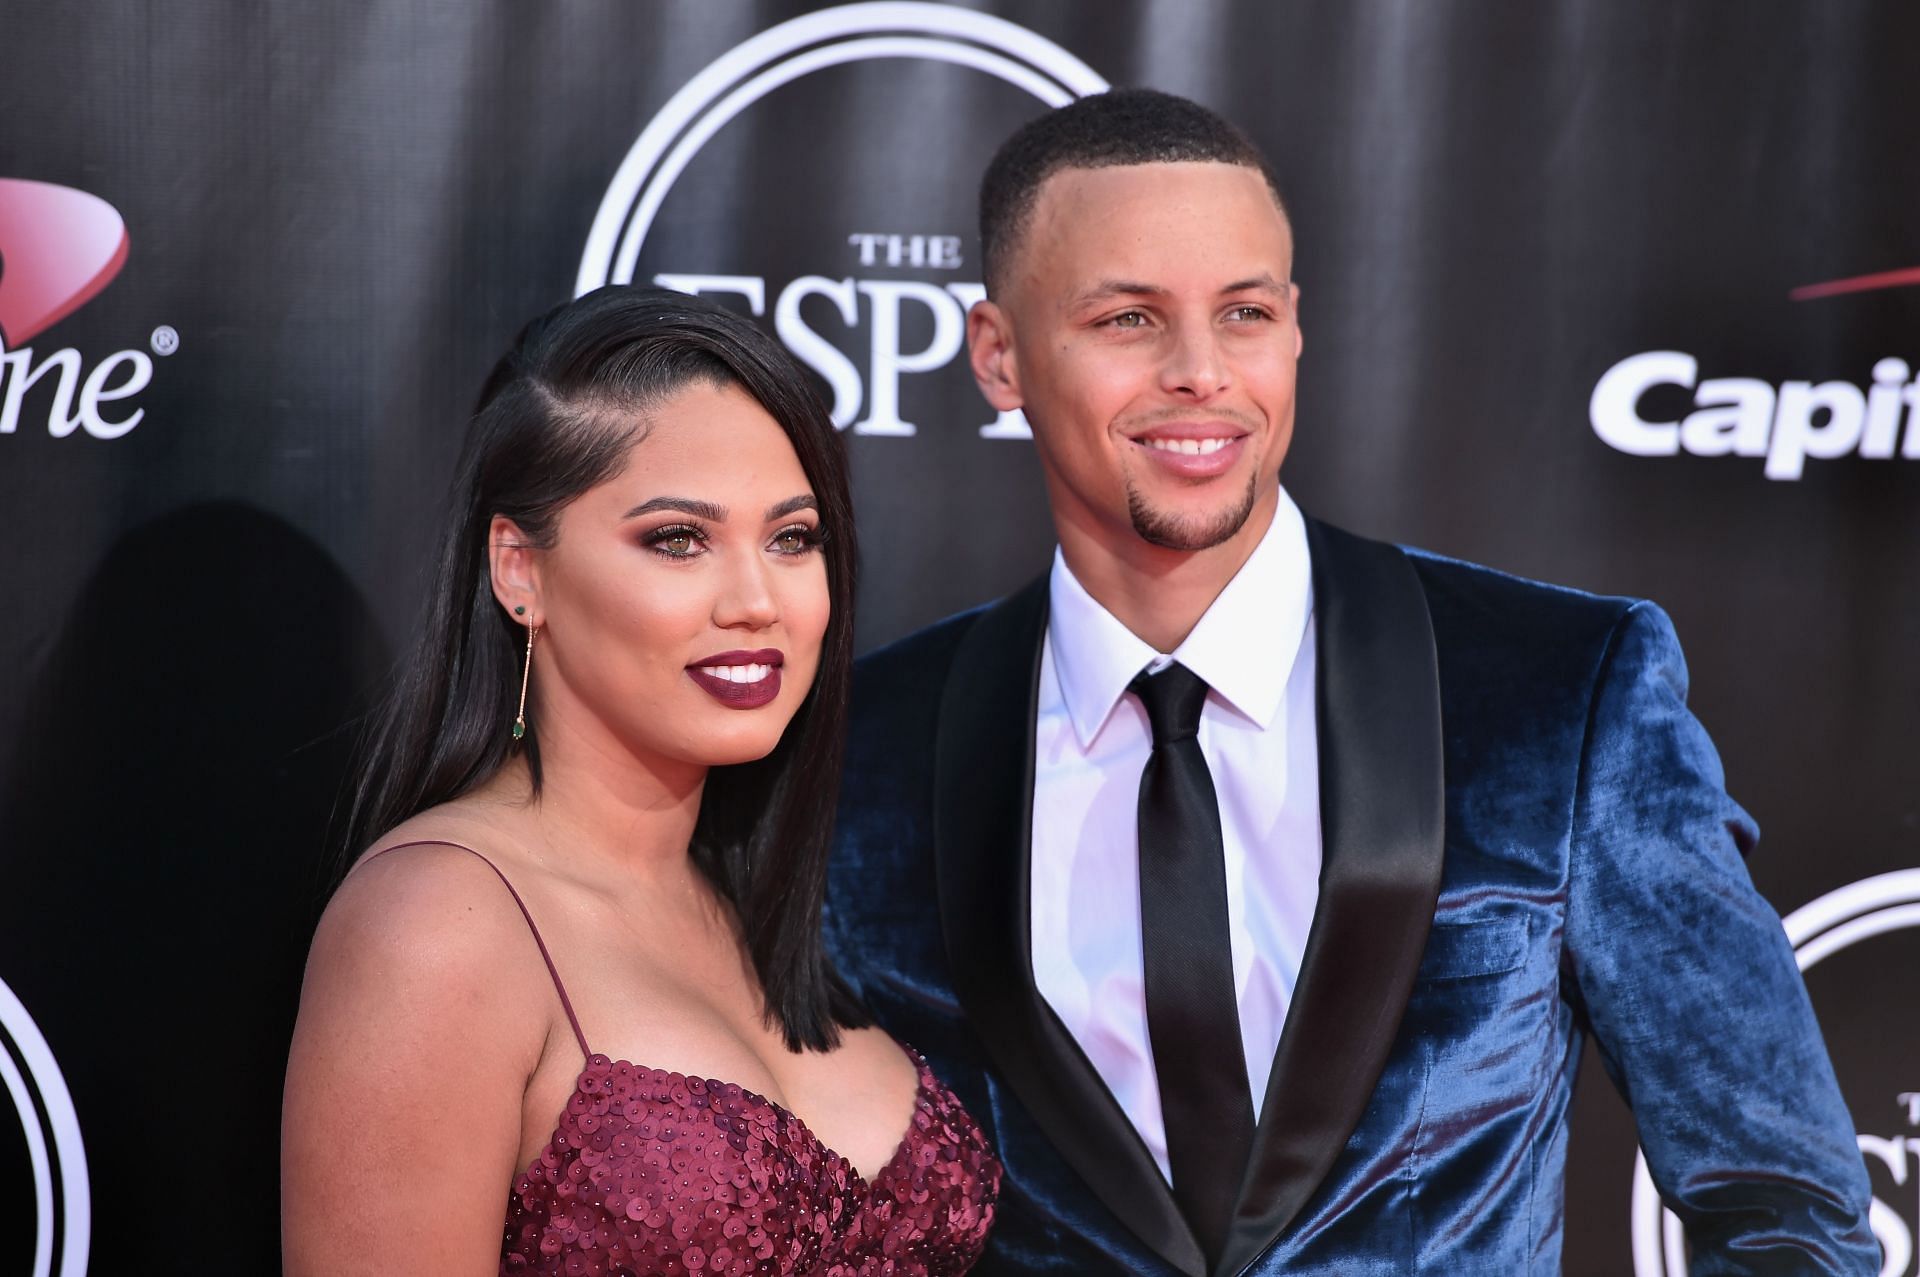 Steph Curry (right) and his wife Ayesha Curry attend the 2016 ESPYS